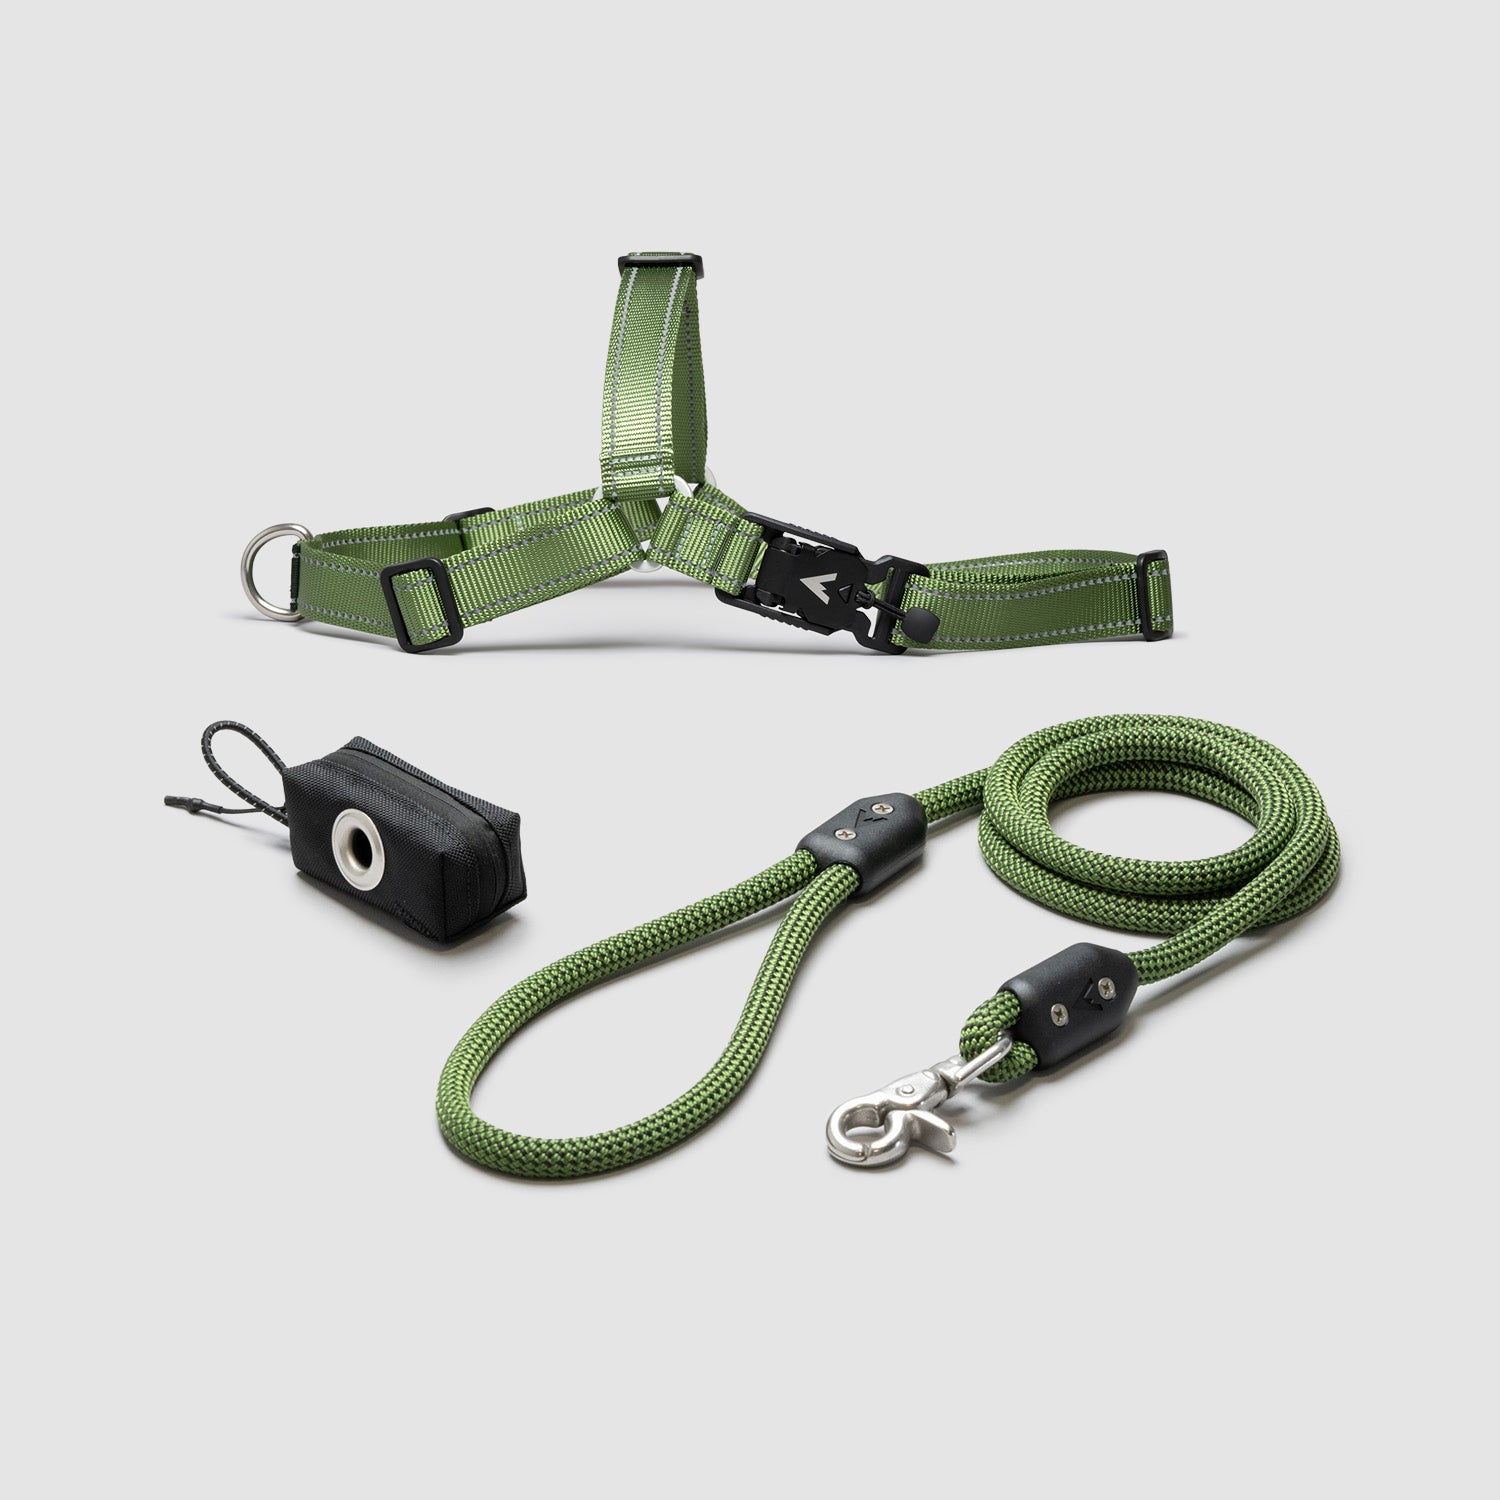 atlas pet company lifetime kit with leash harness and pouch handmade in colorado with lifetime warranty --moss